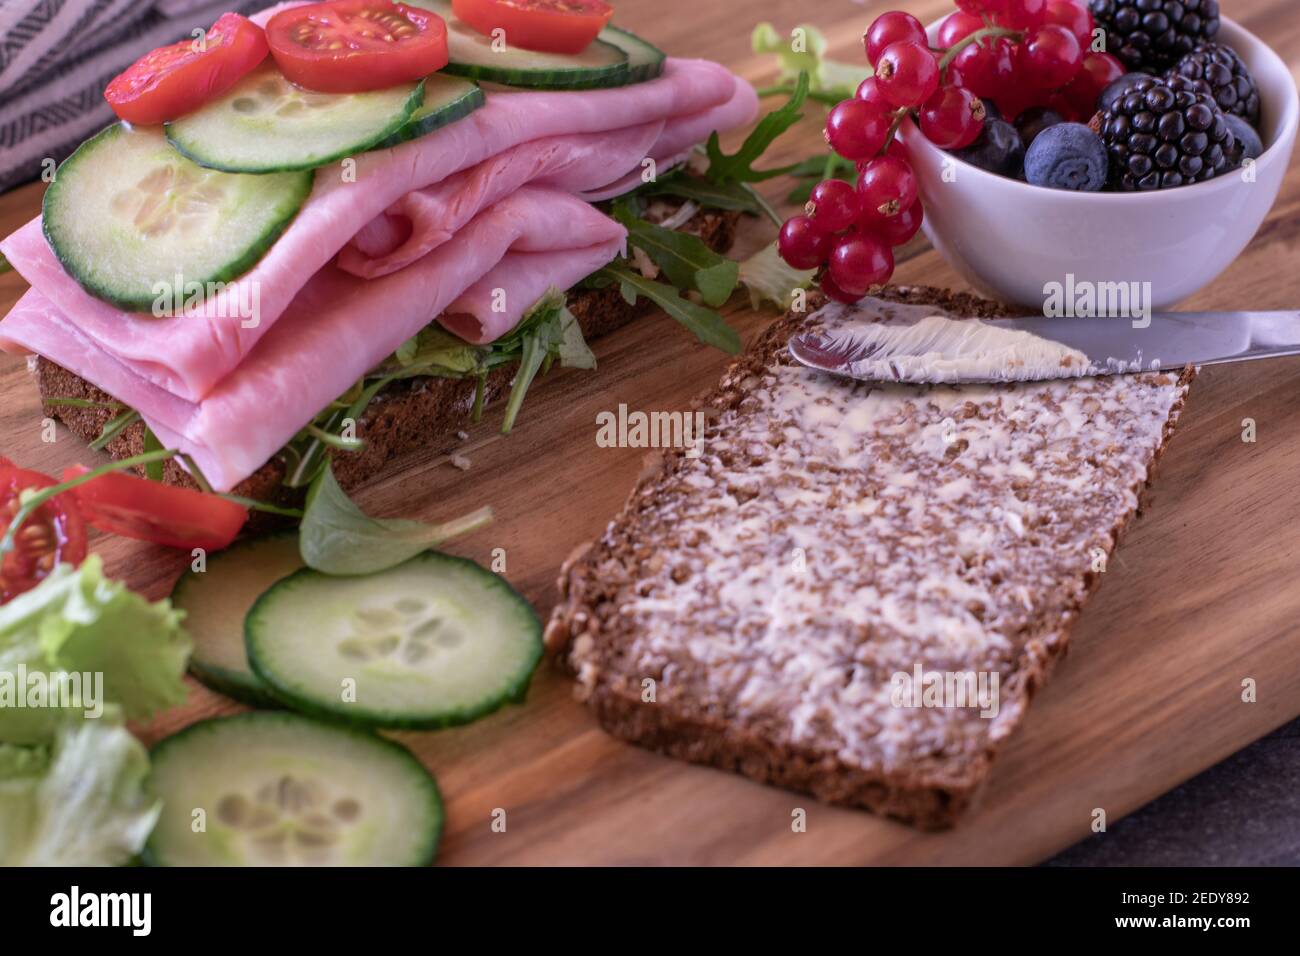 Open sandwich with ham, tomatoes and cucumbers served with fresh berries on a wooden board Stock Photo